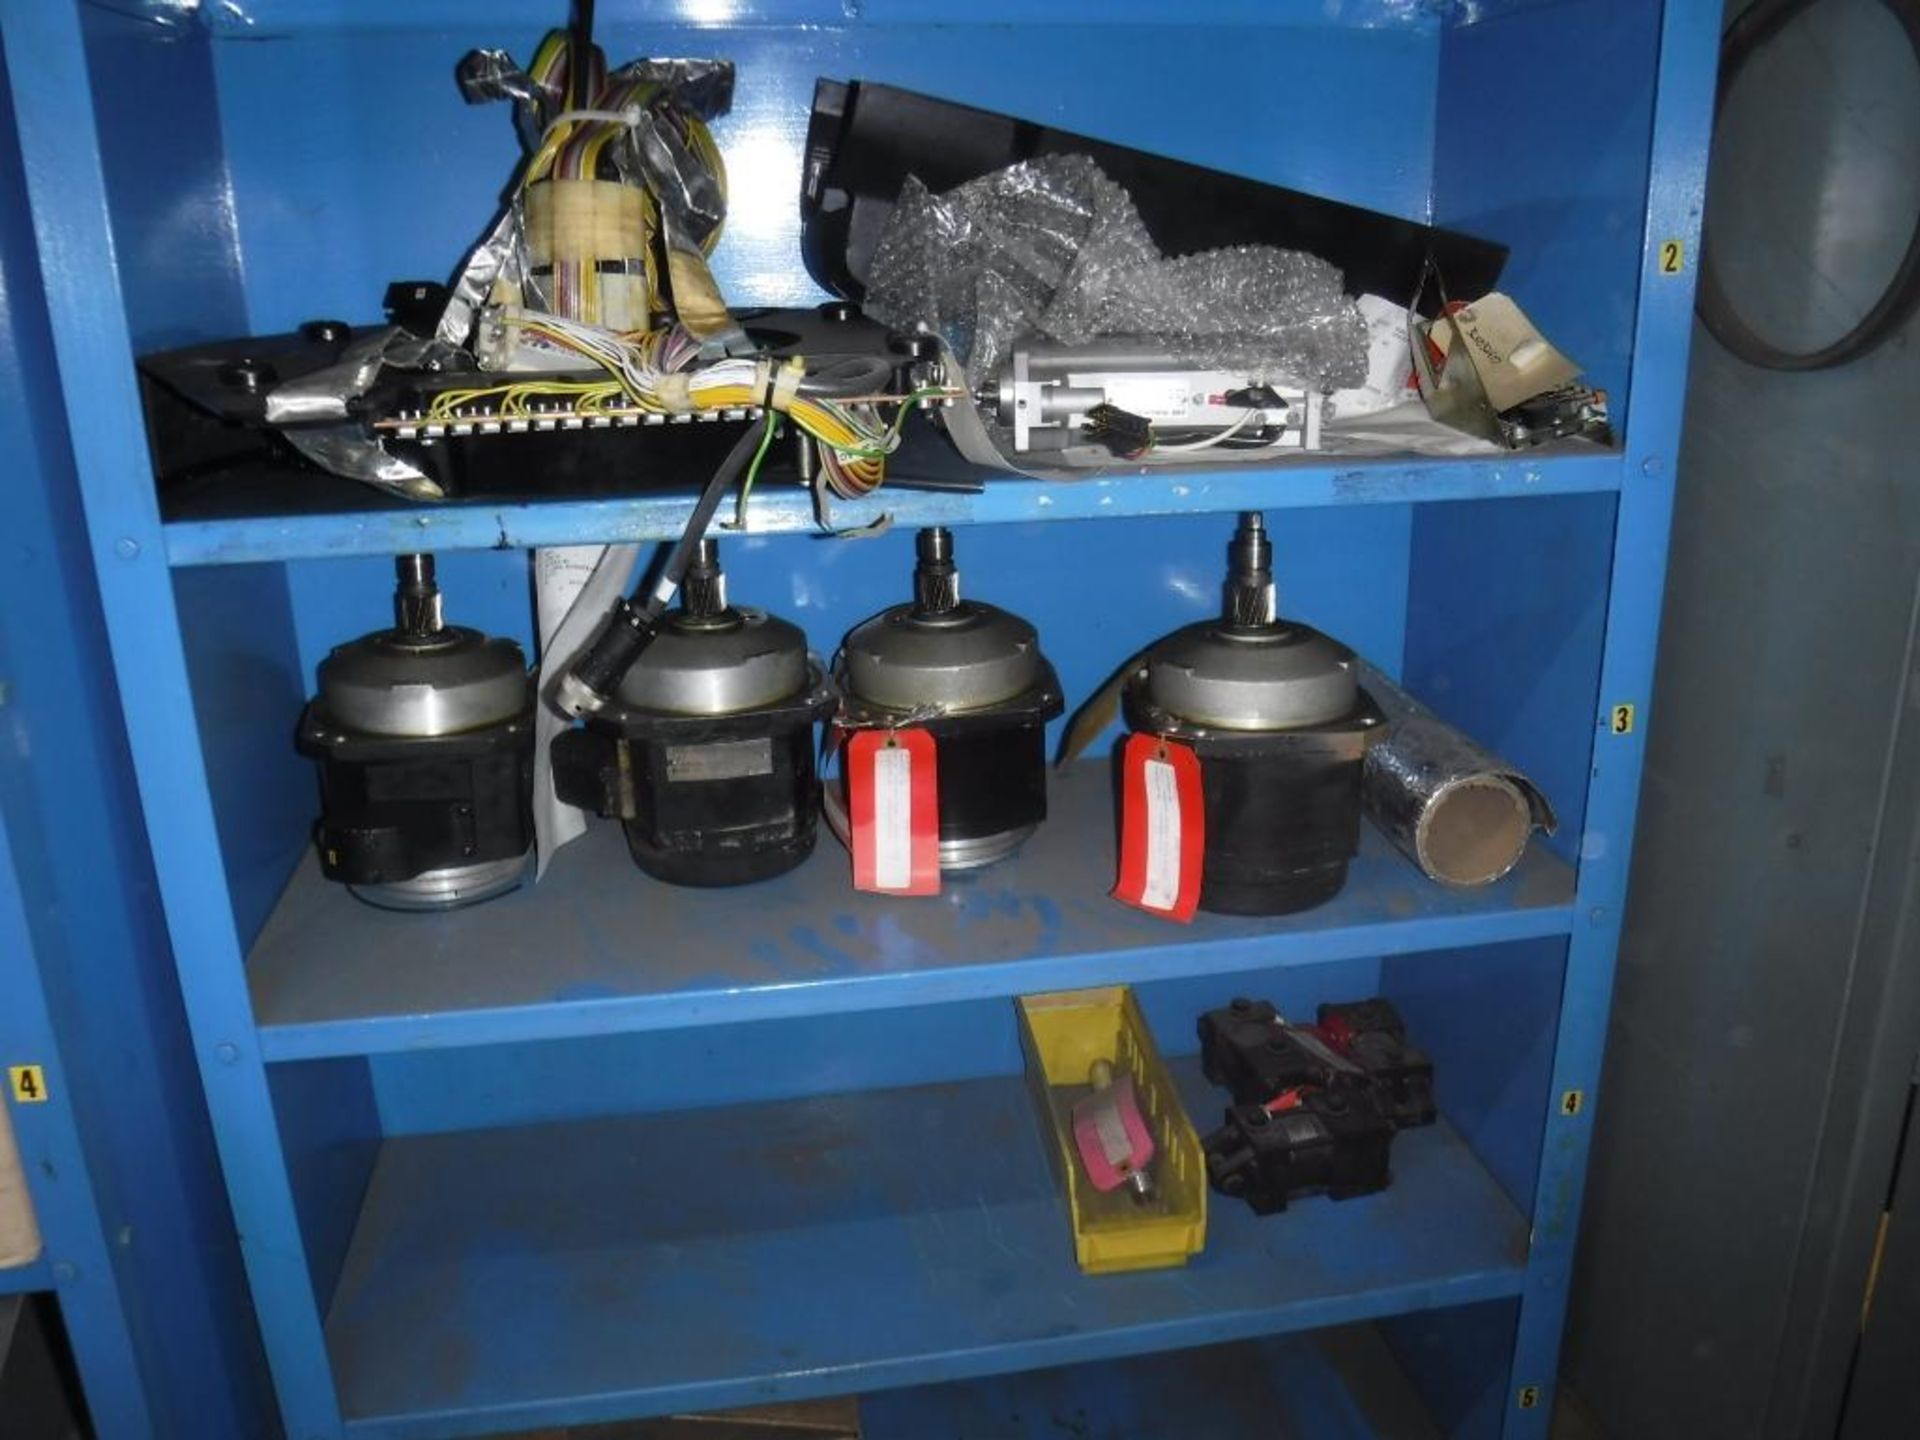 Contents of 2-Shelf Units-Mix Heads,Cables,Seating Valve,Axis Drives for Robts IRB 2000,Etc., LOCATE - Image 5 of 6